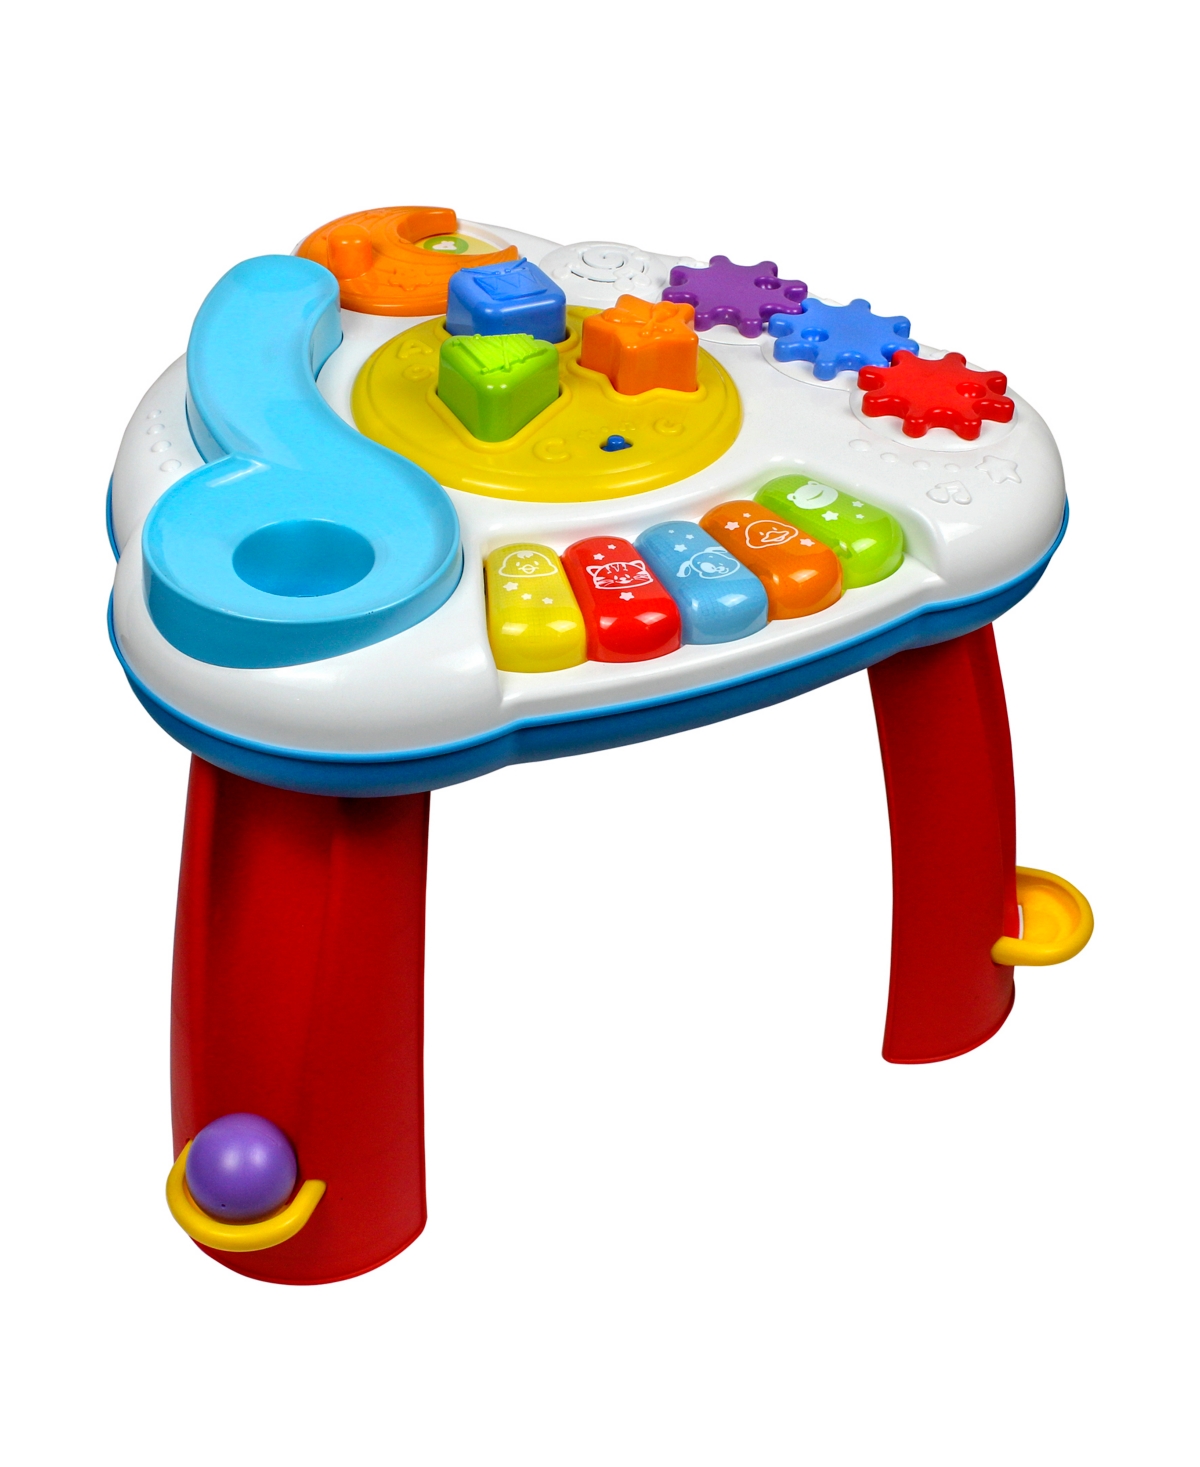 Winfun Balls N Shapes Musical Table In Red